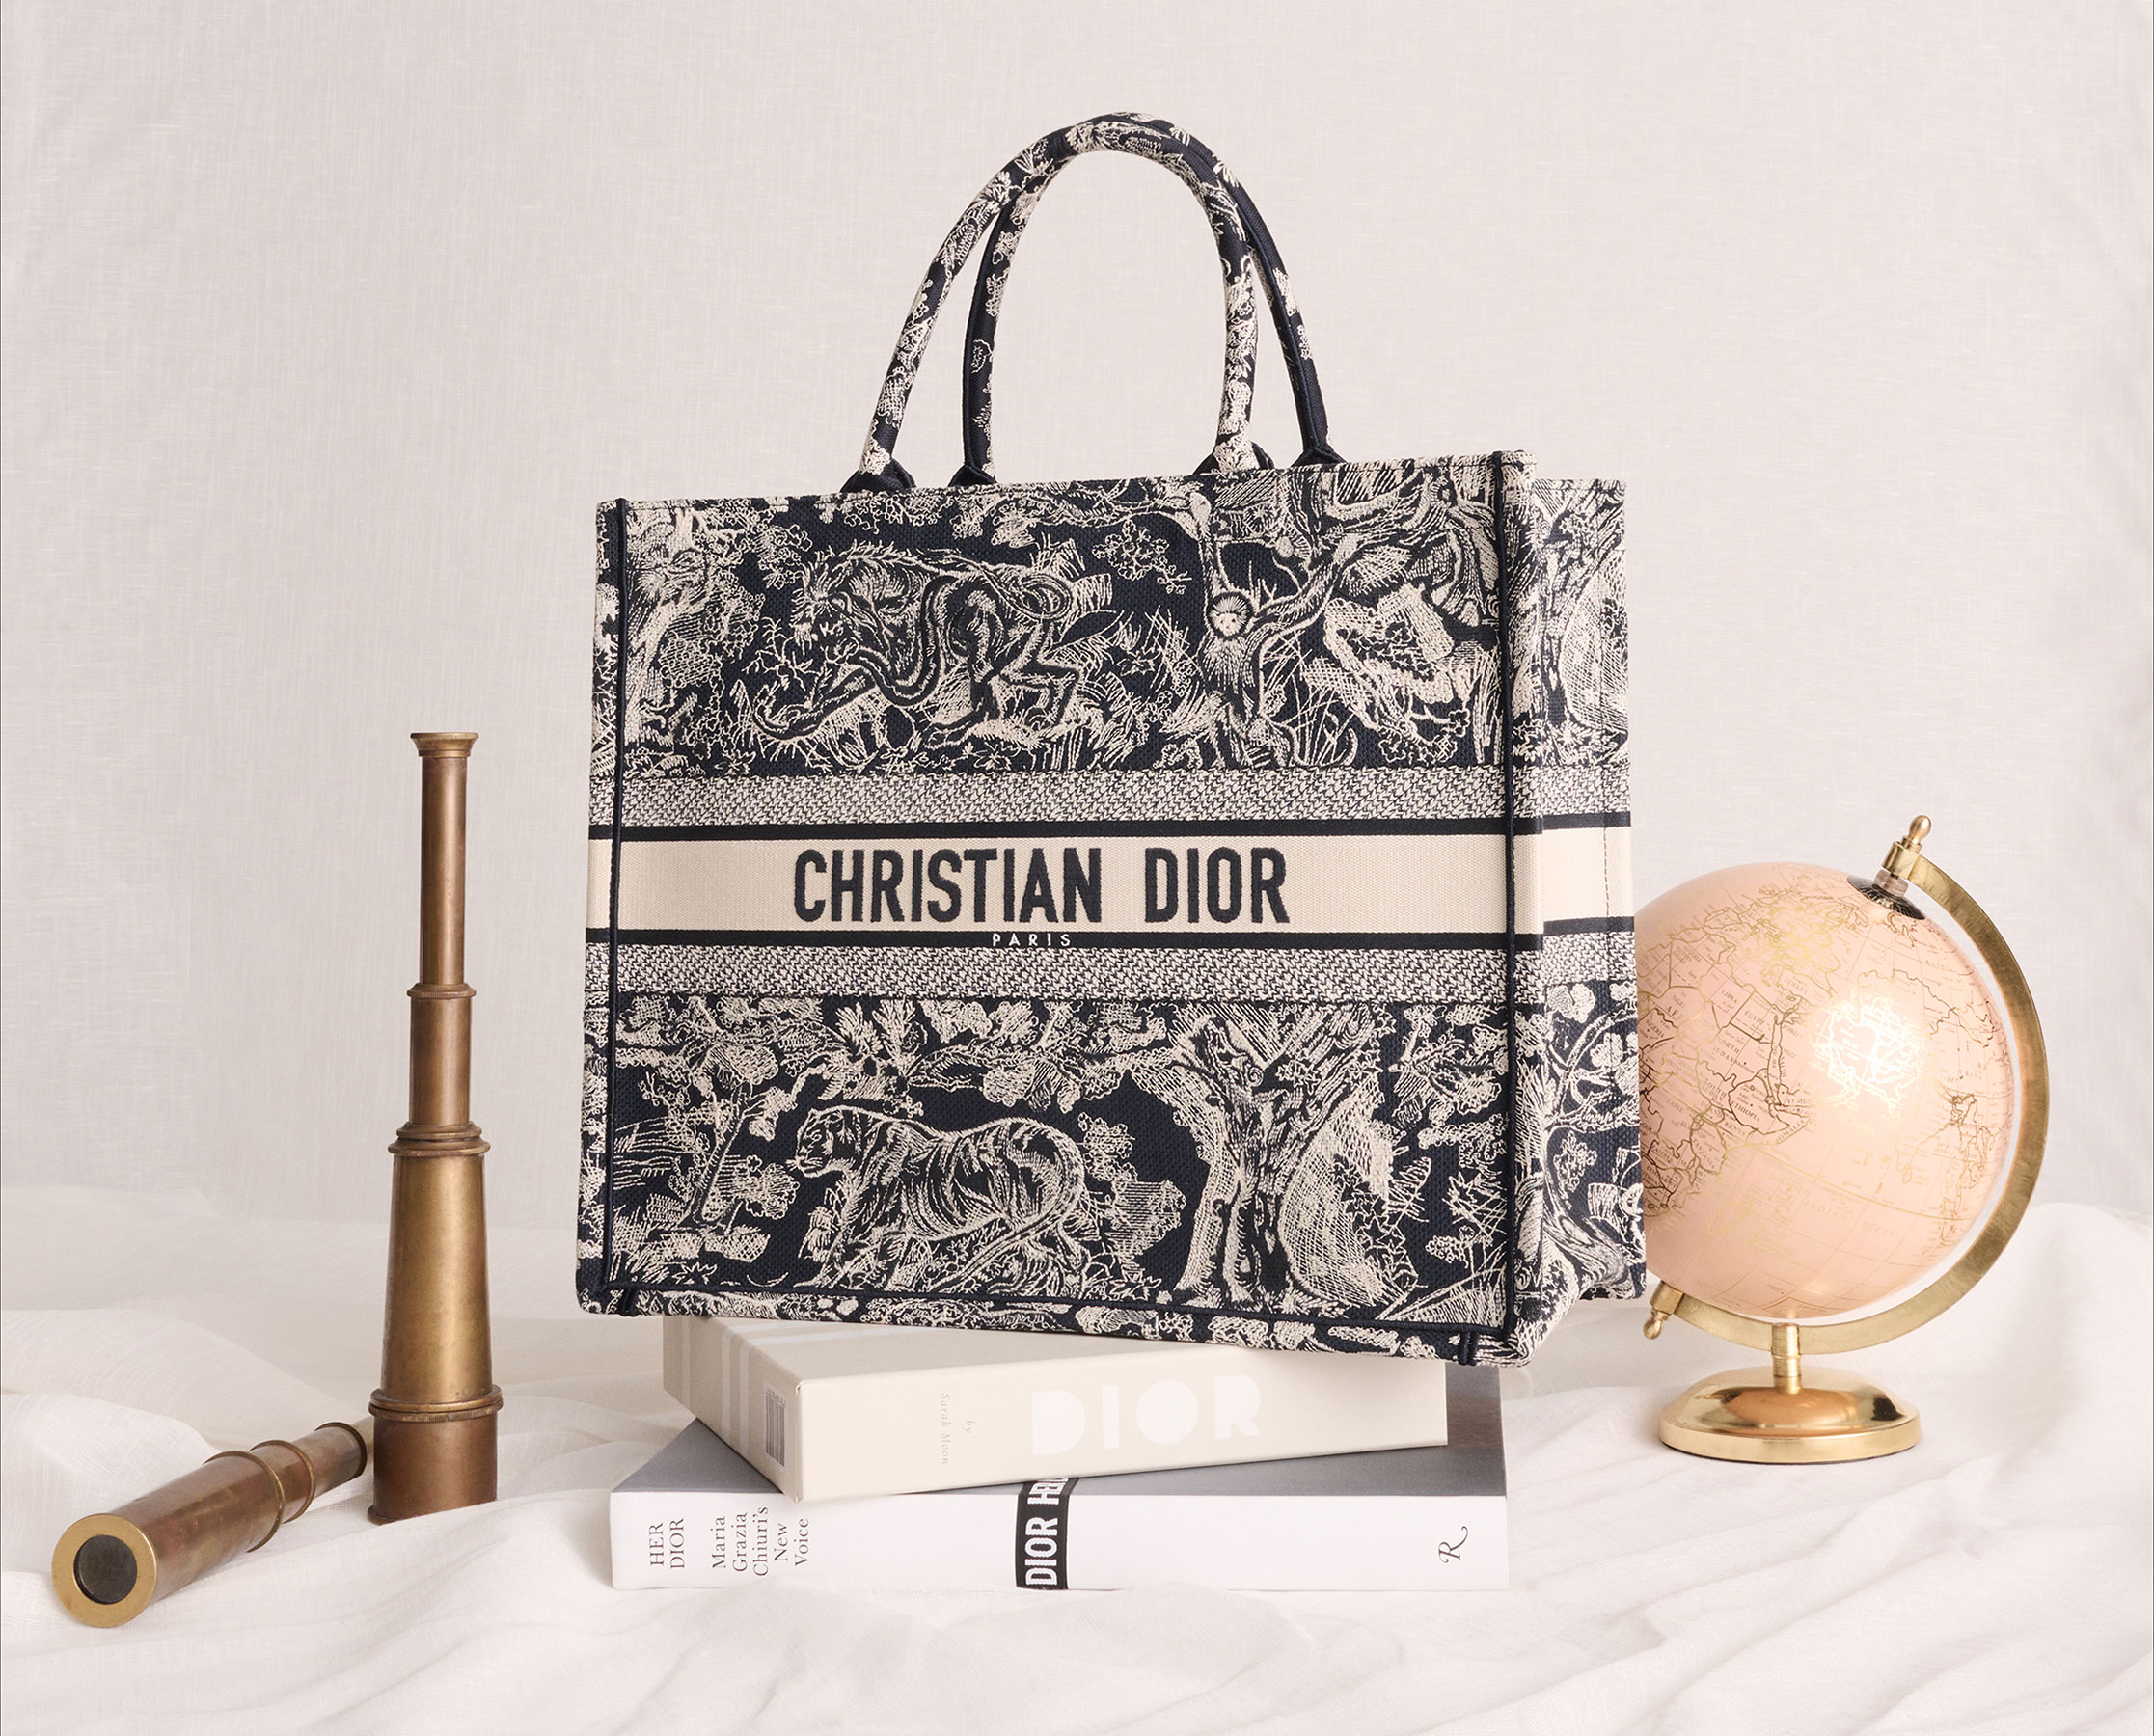 Thoughts on the Dior book tote : r/handbags